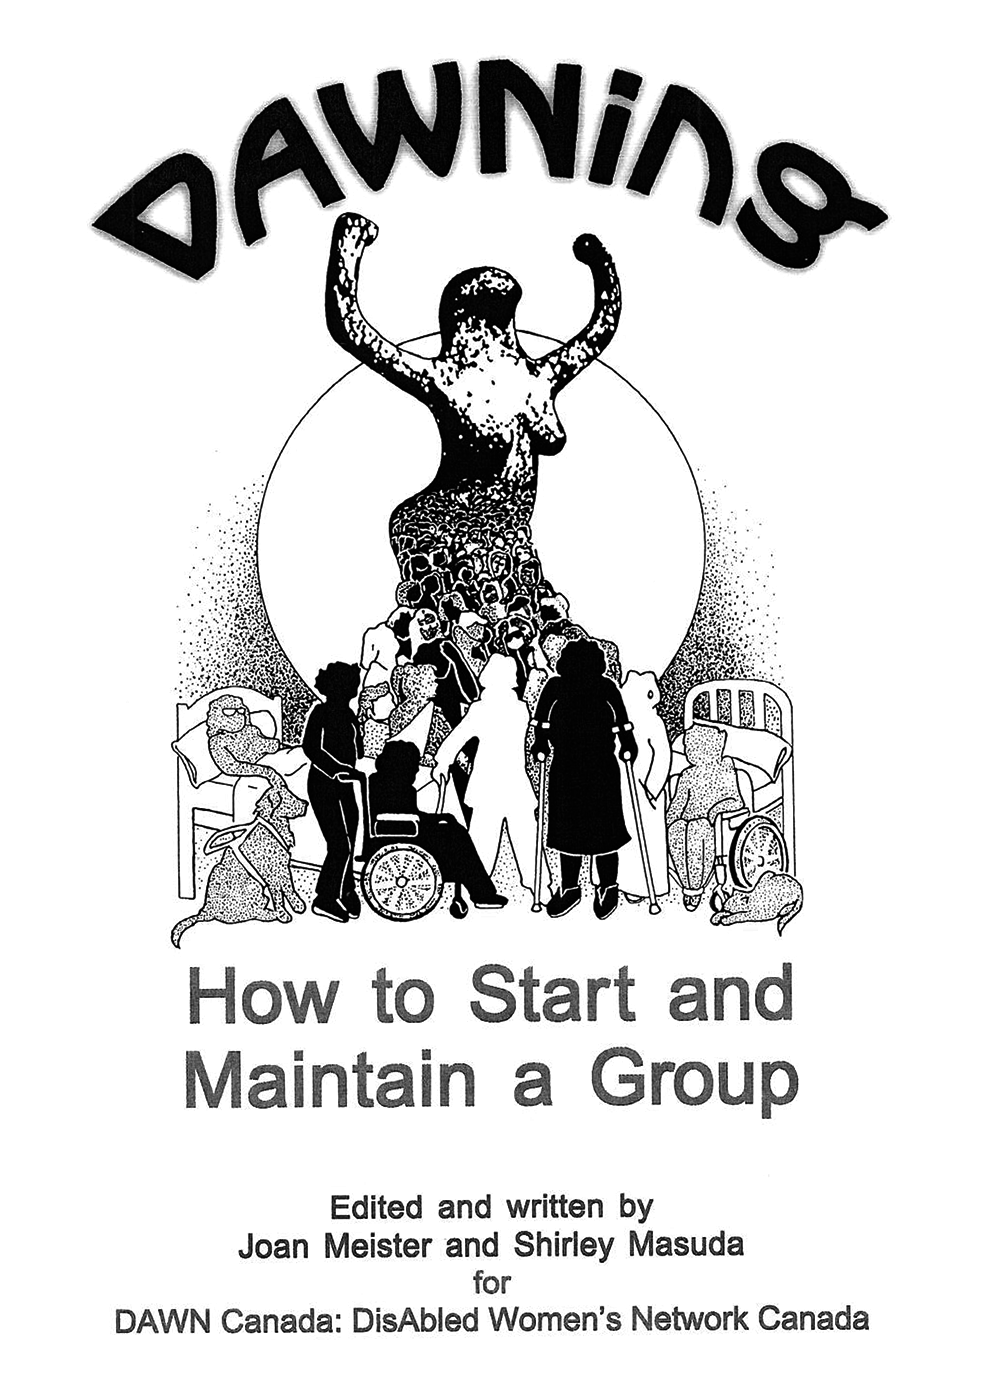 Scan of a cover of a manual with the words: "DAWNing: How to Start and Maintain a Group, Eddited and written by Joan Meister and Shirley Masuda for DAWN Canada: DisAbled Women's Network of Canada"